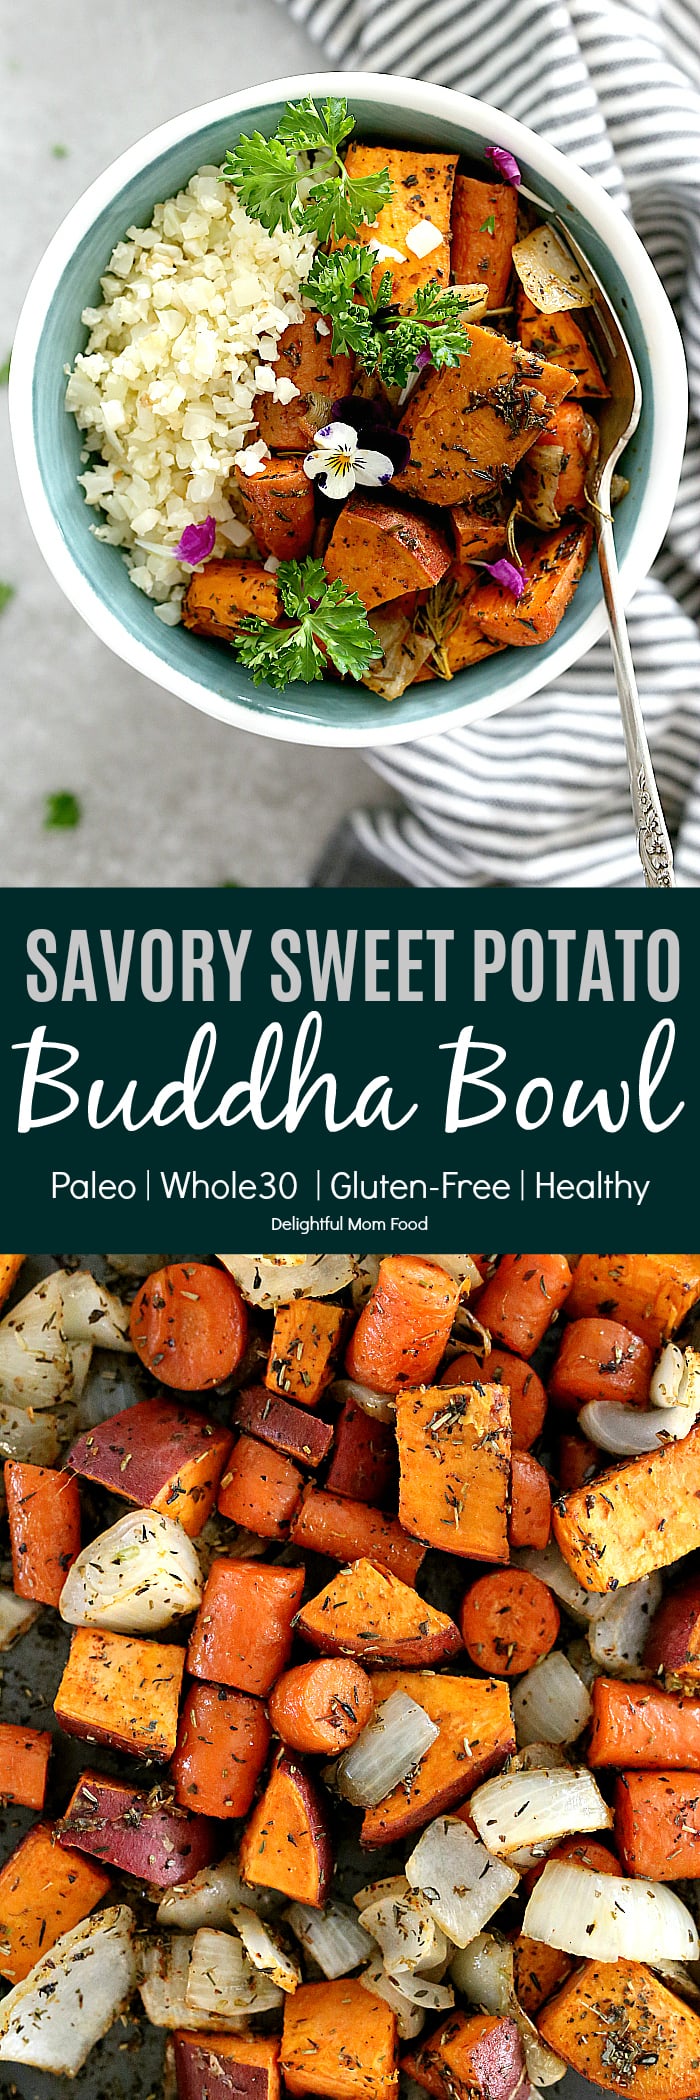 Savory roasted sweet potatoes, carrots and onion over cauliflower rice is a family favorite buddha bowl ready in minutes! This buddha bowl is deliciously packed with irresistible flavors and caters to most diets including gluten-free, Whole 30, Paleo and vegan! #glutenfree #buddhabowl #roasted #sweetpotatoes #carrots #sheetpan #easy #cauliflowerrice #whole30 #vegan #vegetarian | Recipe at delightfulmomfood.com